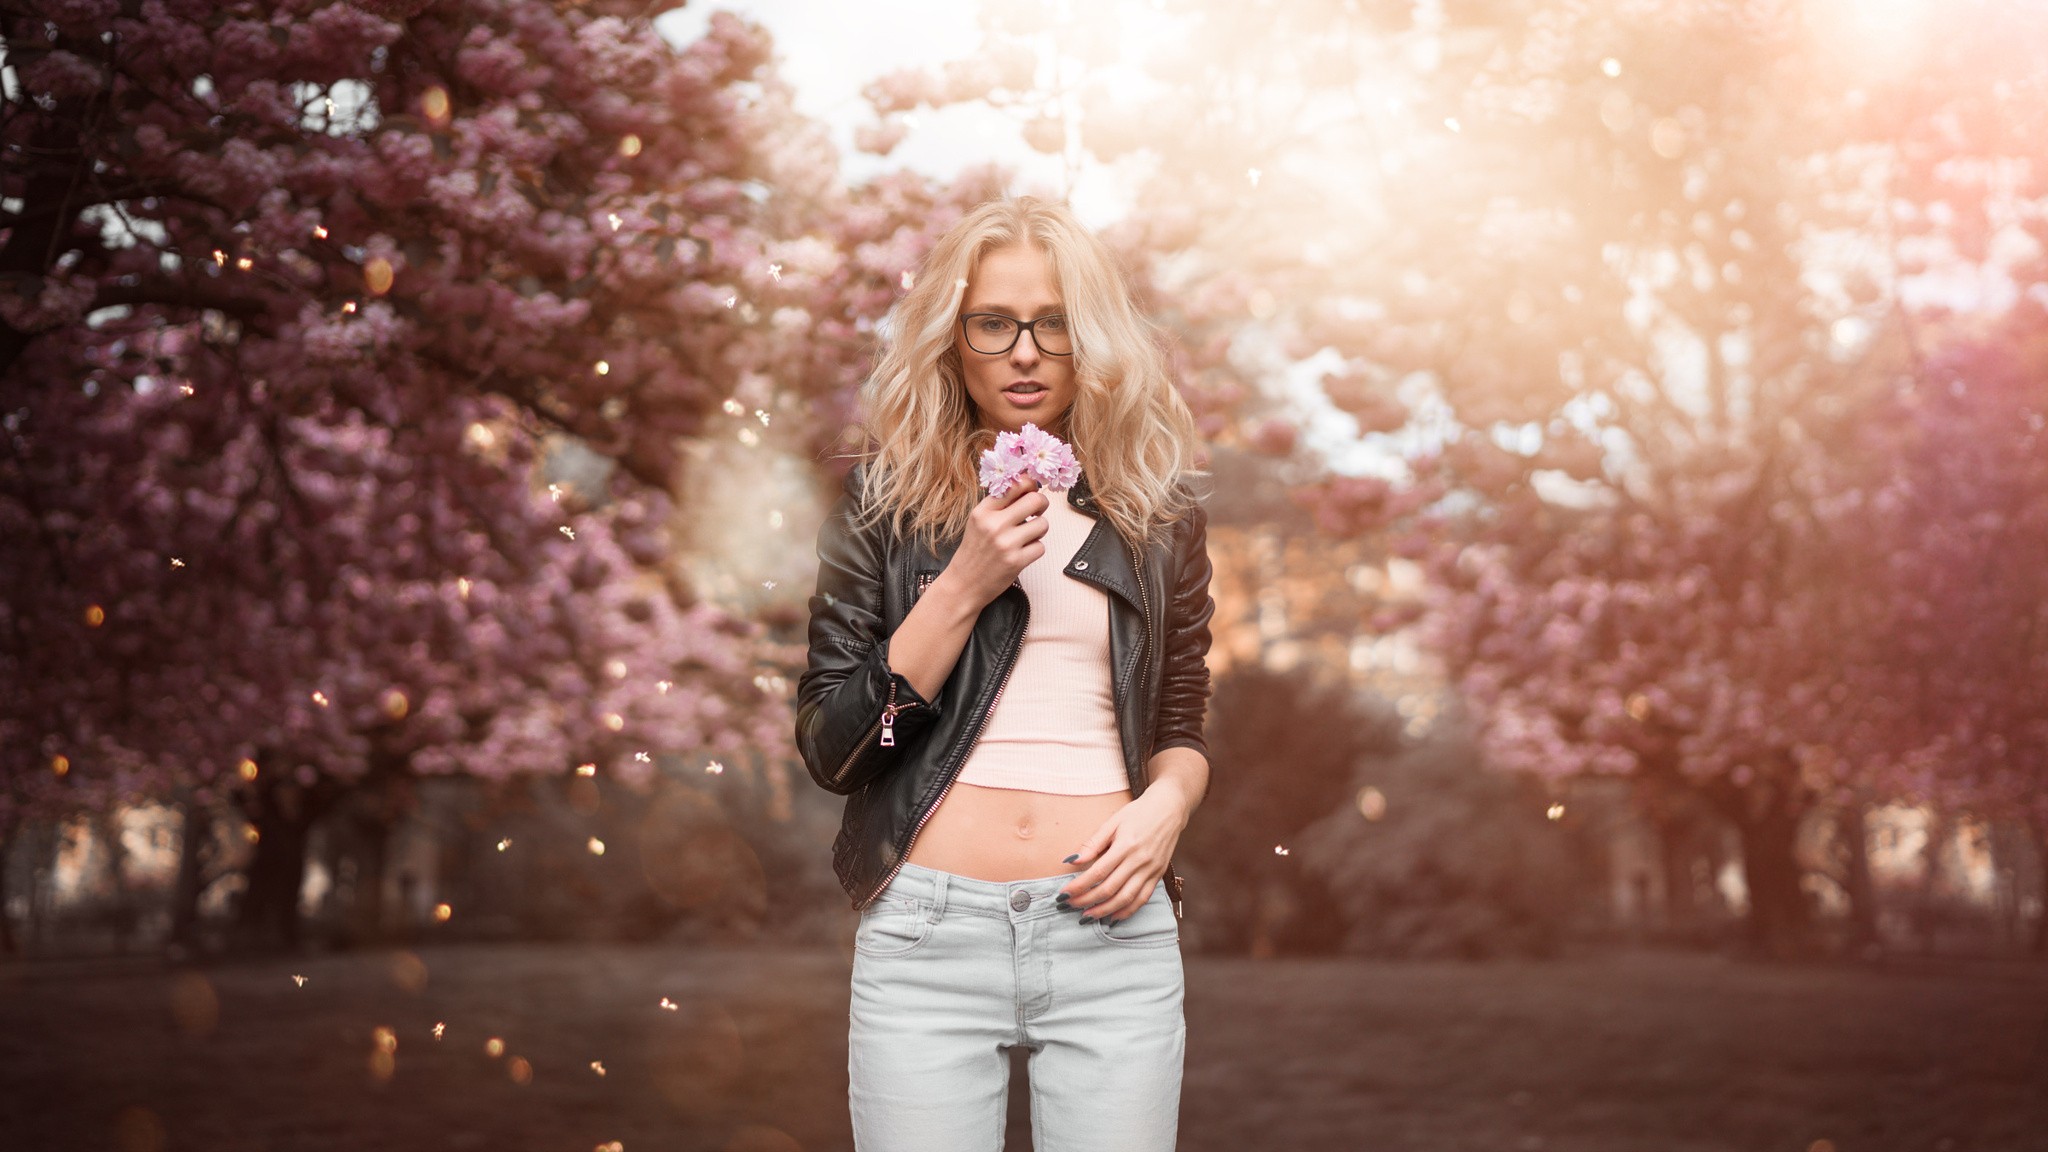 People 2048x1152 women blonde model portrait trees pants jeans jacket Ivan Gorokhov flowers glasses leather jacket women with glasses standing long hair painted nails bare midriff